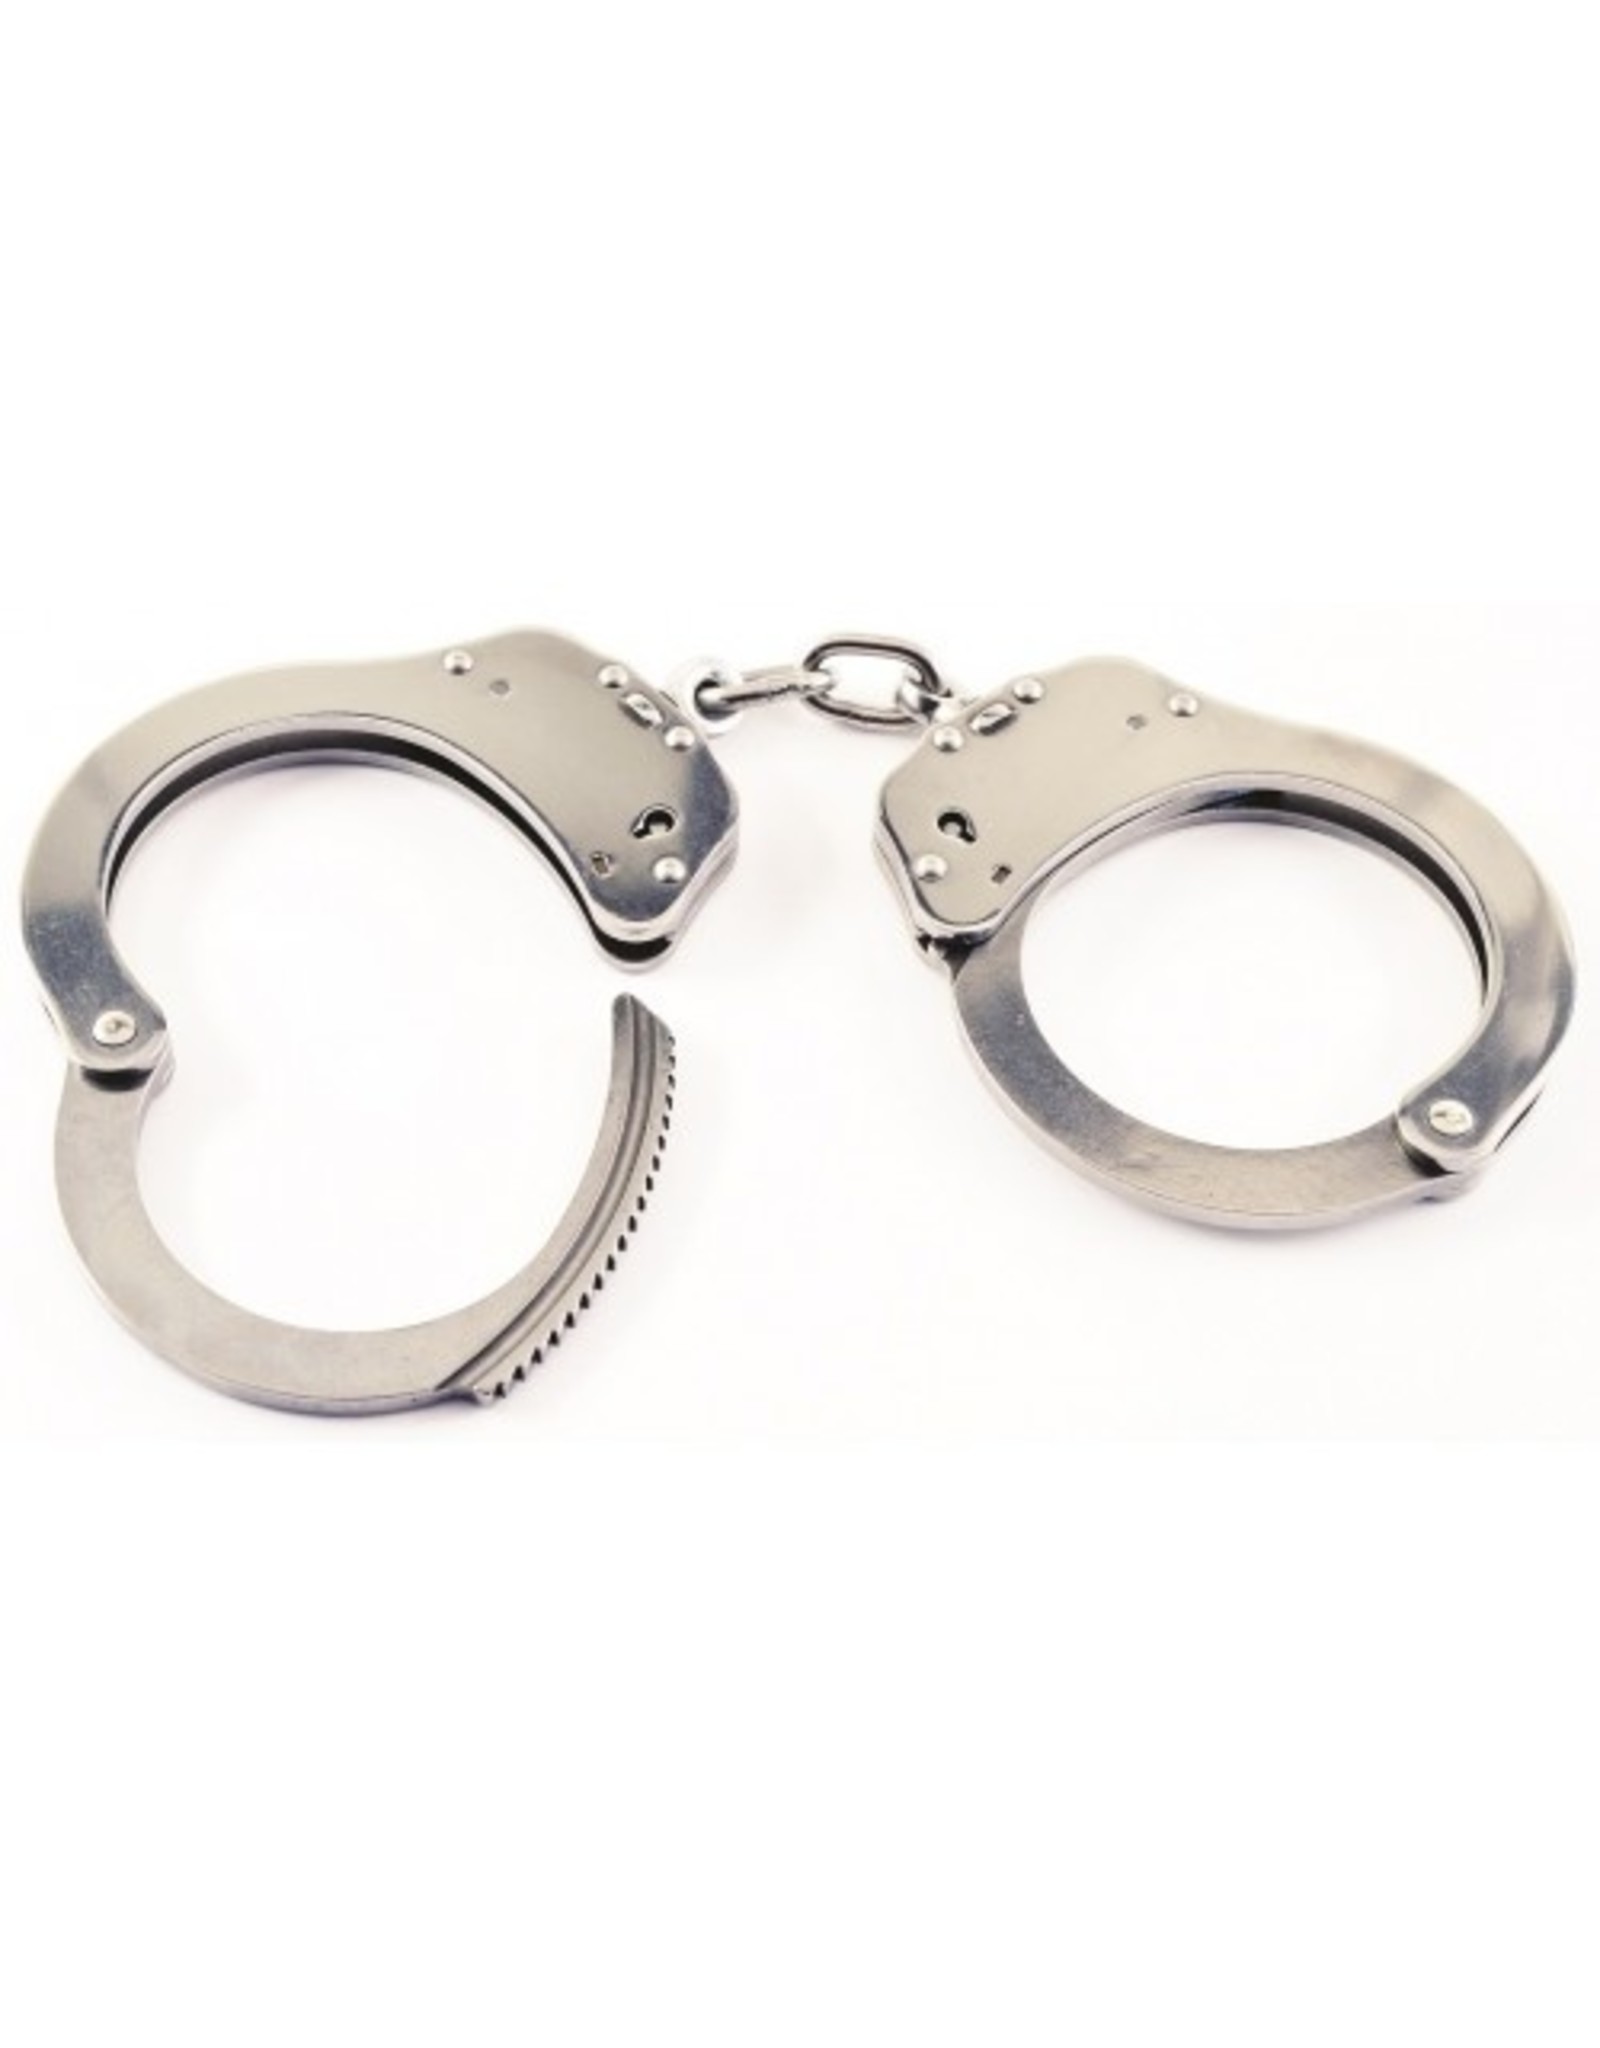 RUKO KNIVES Double Lock Stainless Steel Chain Handcuffs - G-222L